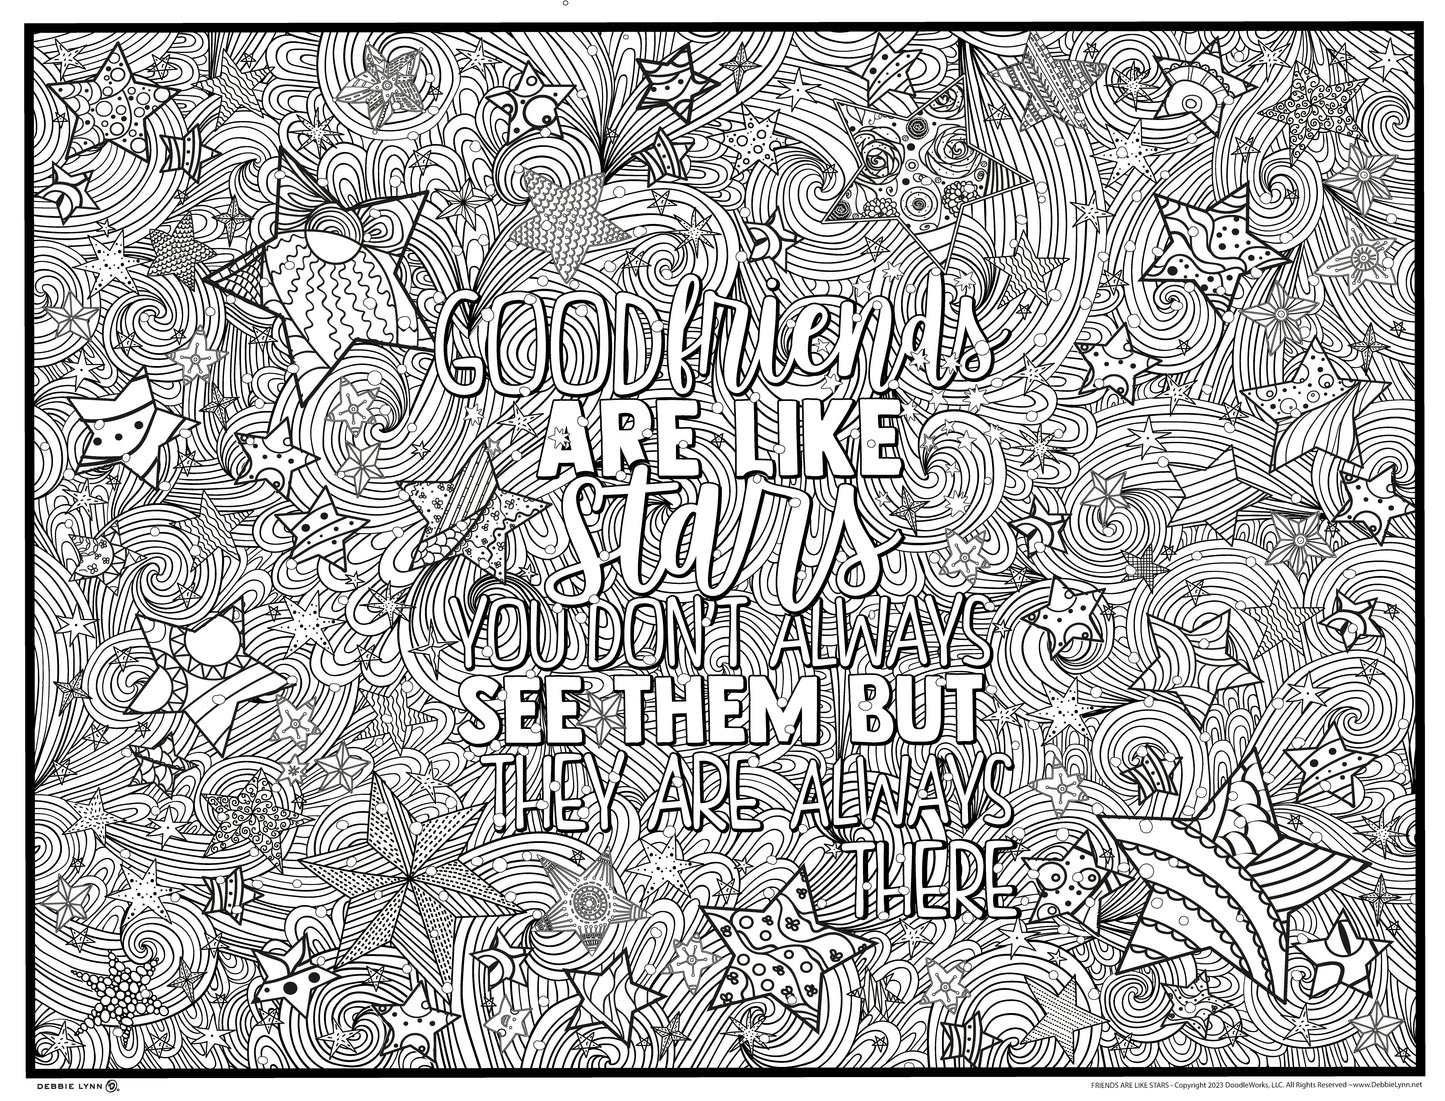 Friends Like Stars Giant Coloring Poster 46"x60"